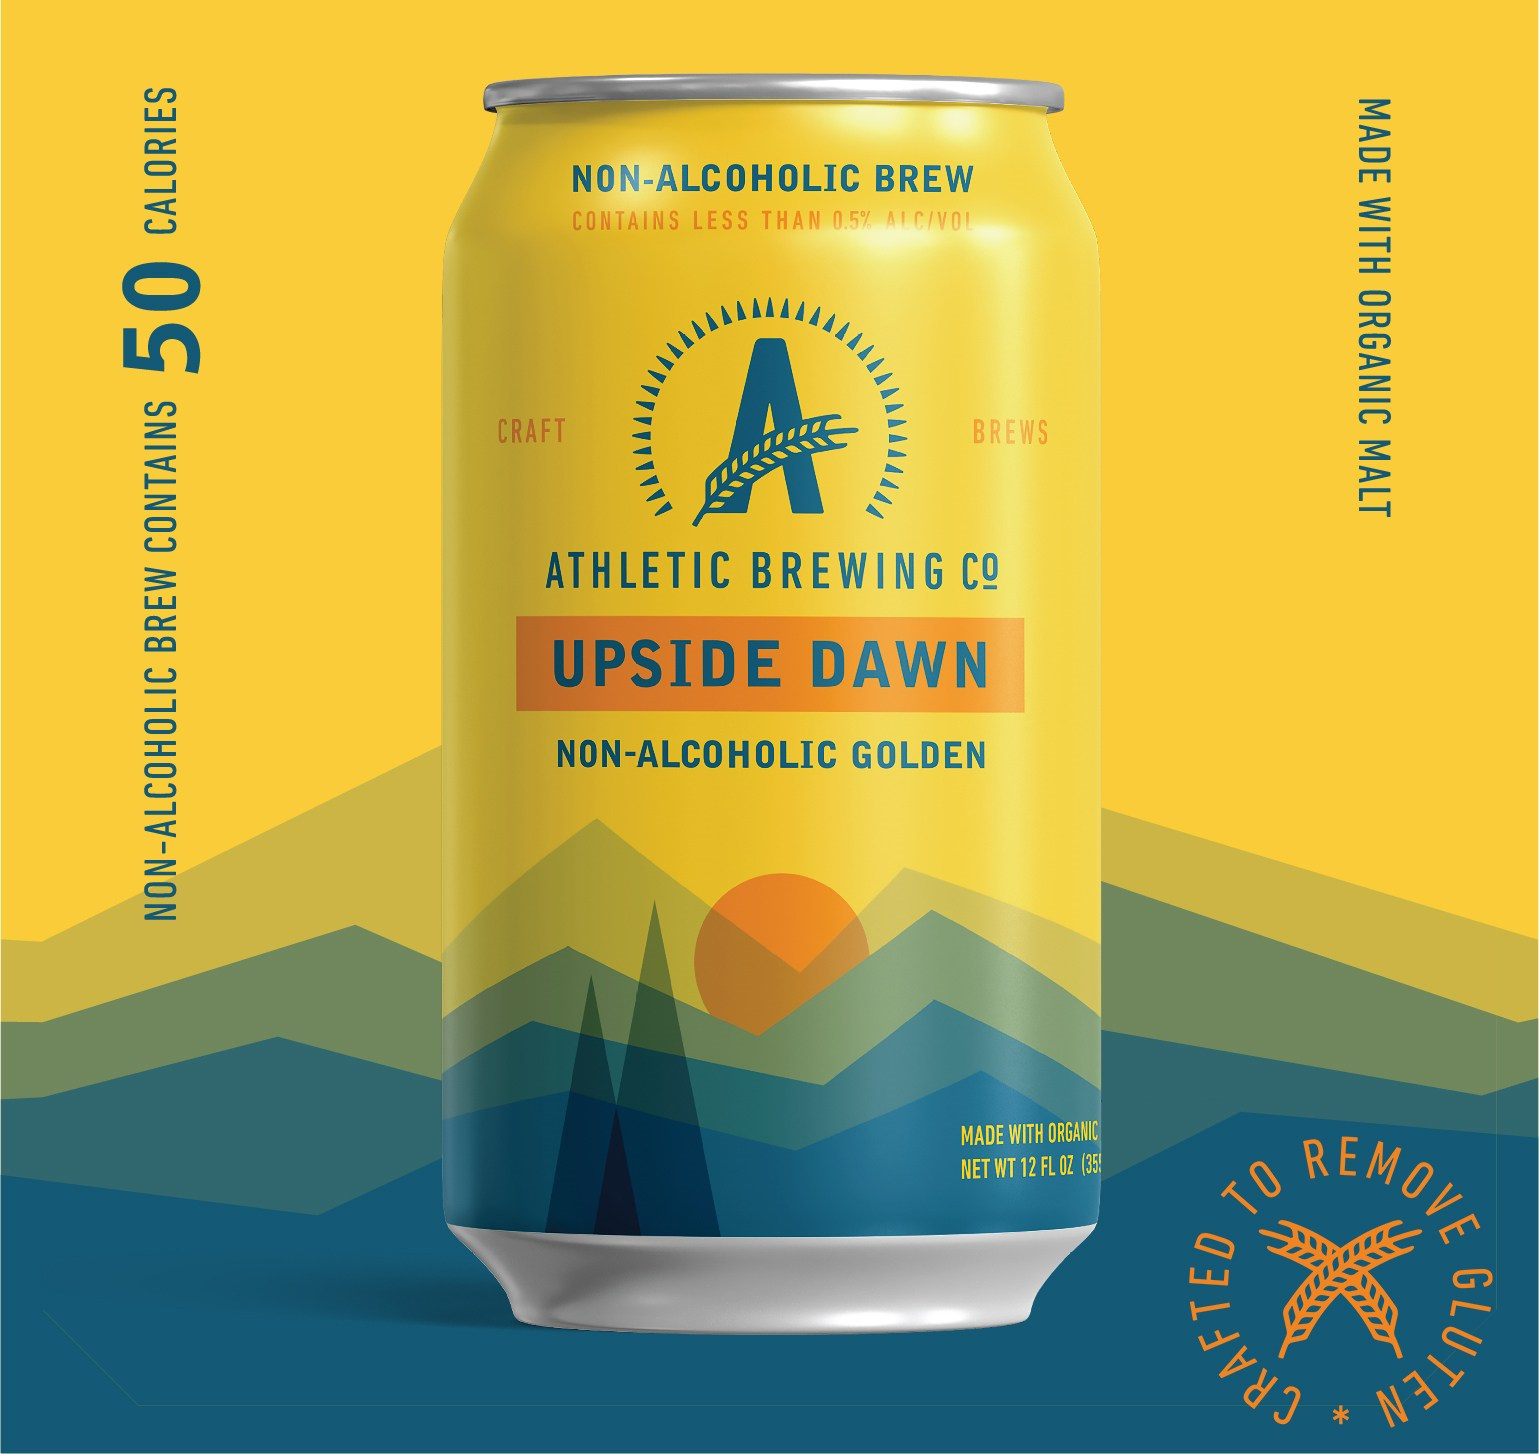 Athletic Brewing Co. Upside Dawn Non-Alcoholic Golden Ale